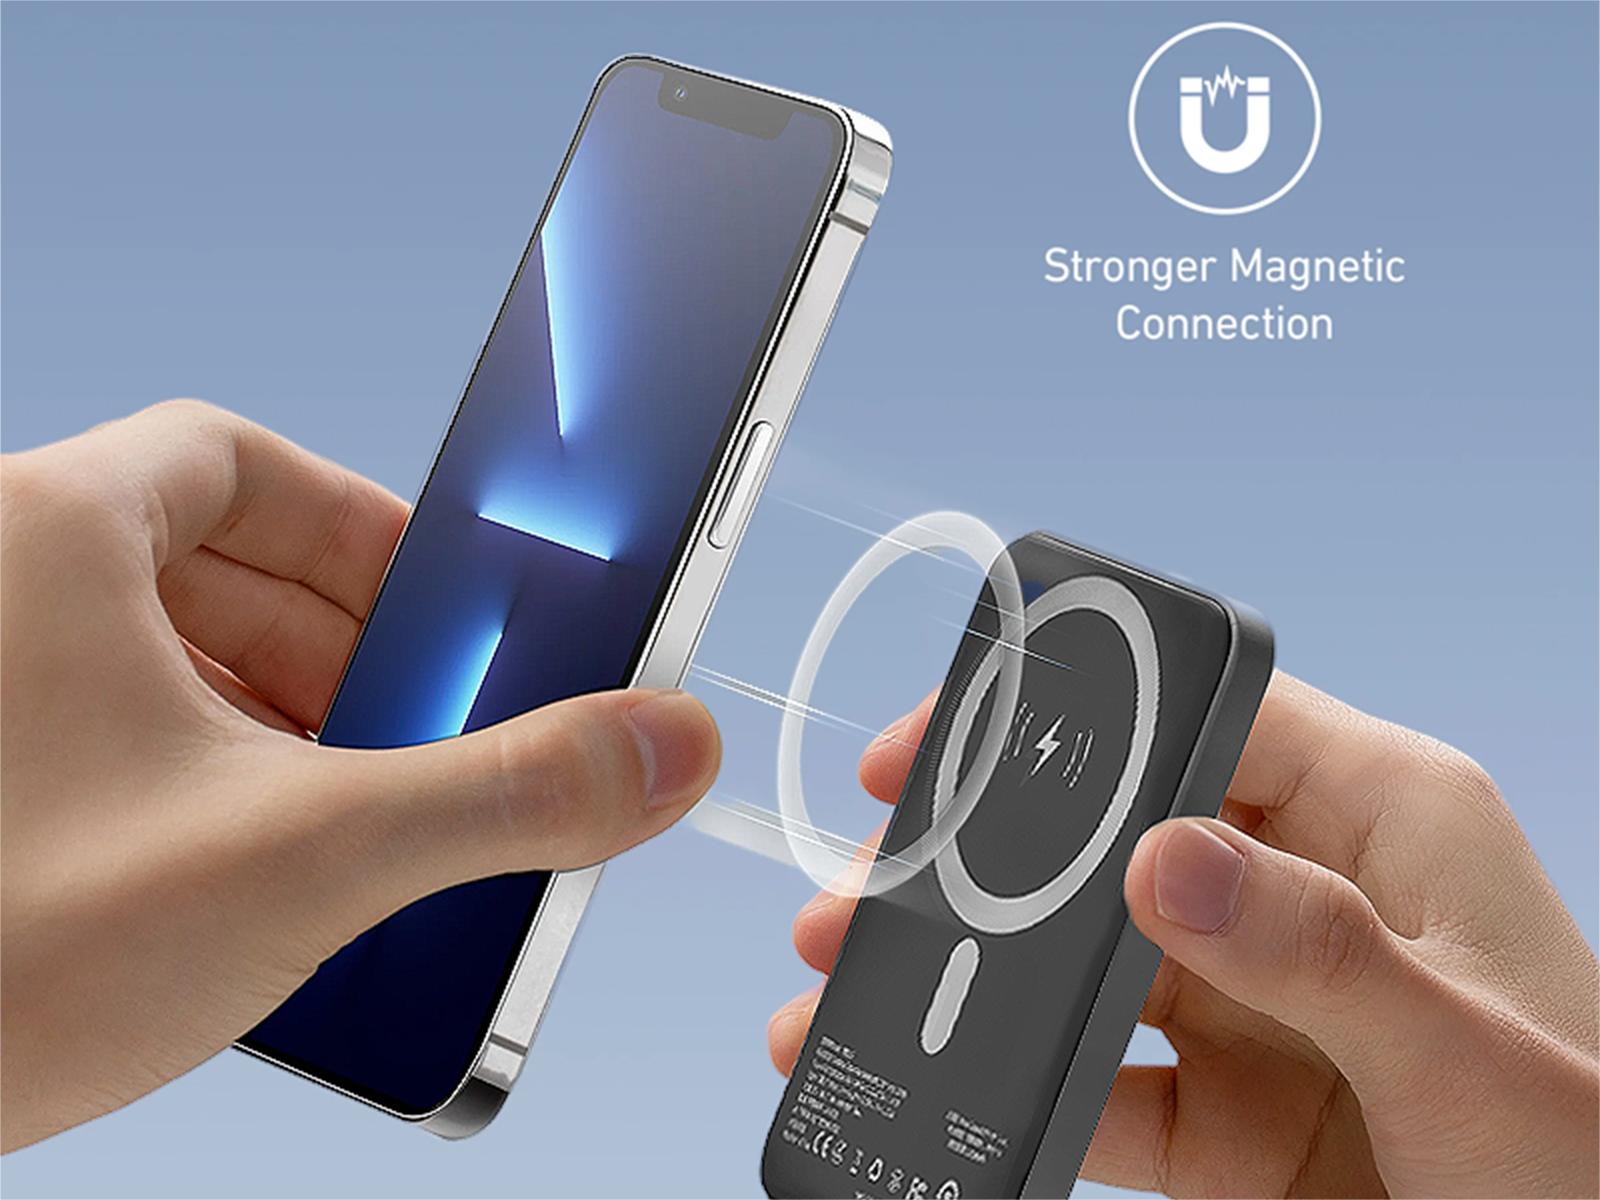 TWNT-MS15 Super Mini, Lightweight, Ultra-Slim, Palm-Sized Magnetic Power Bank 2 options available 5000mAh/1W mAh